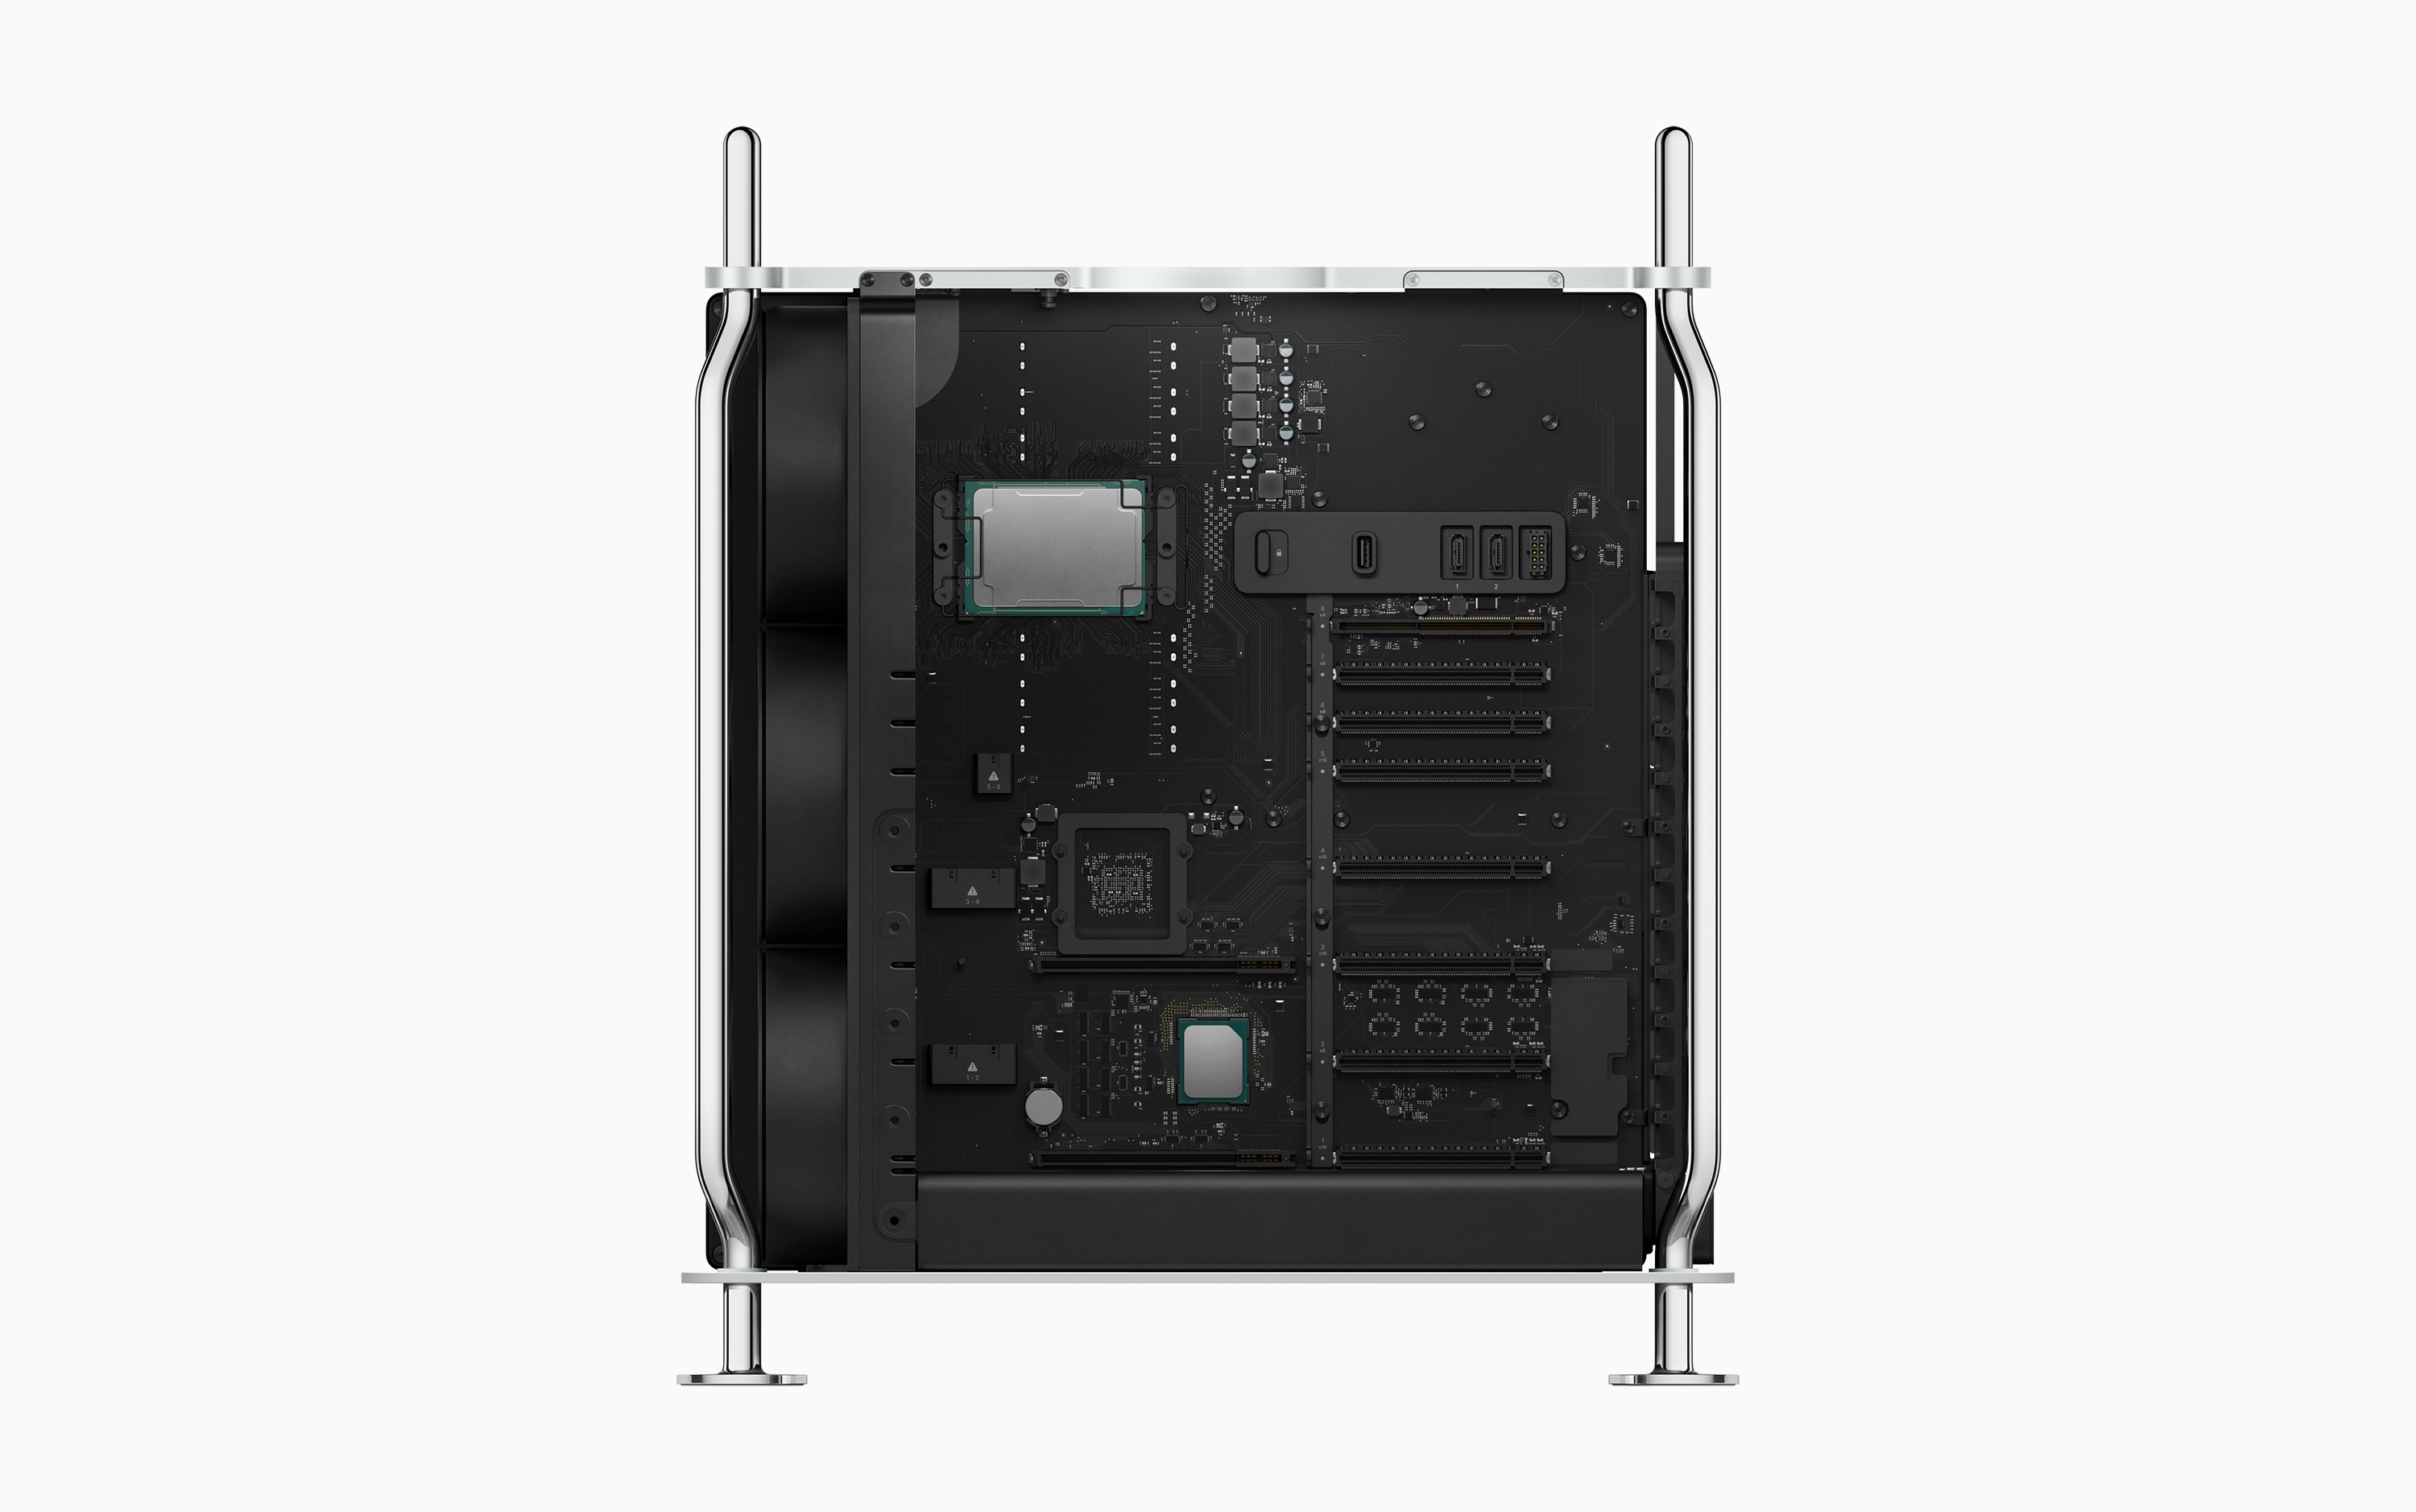 A look inside the new Mac Pro.